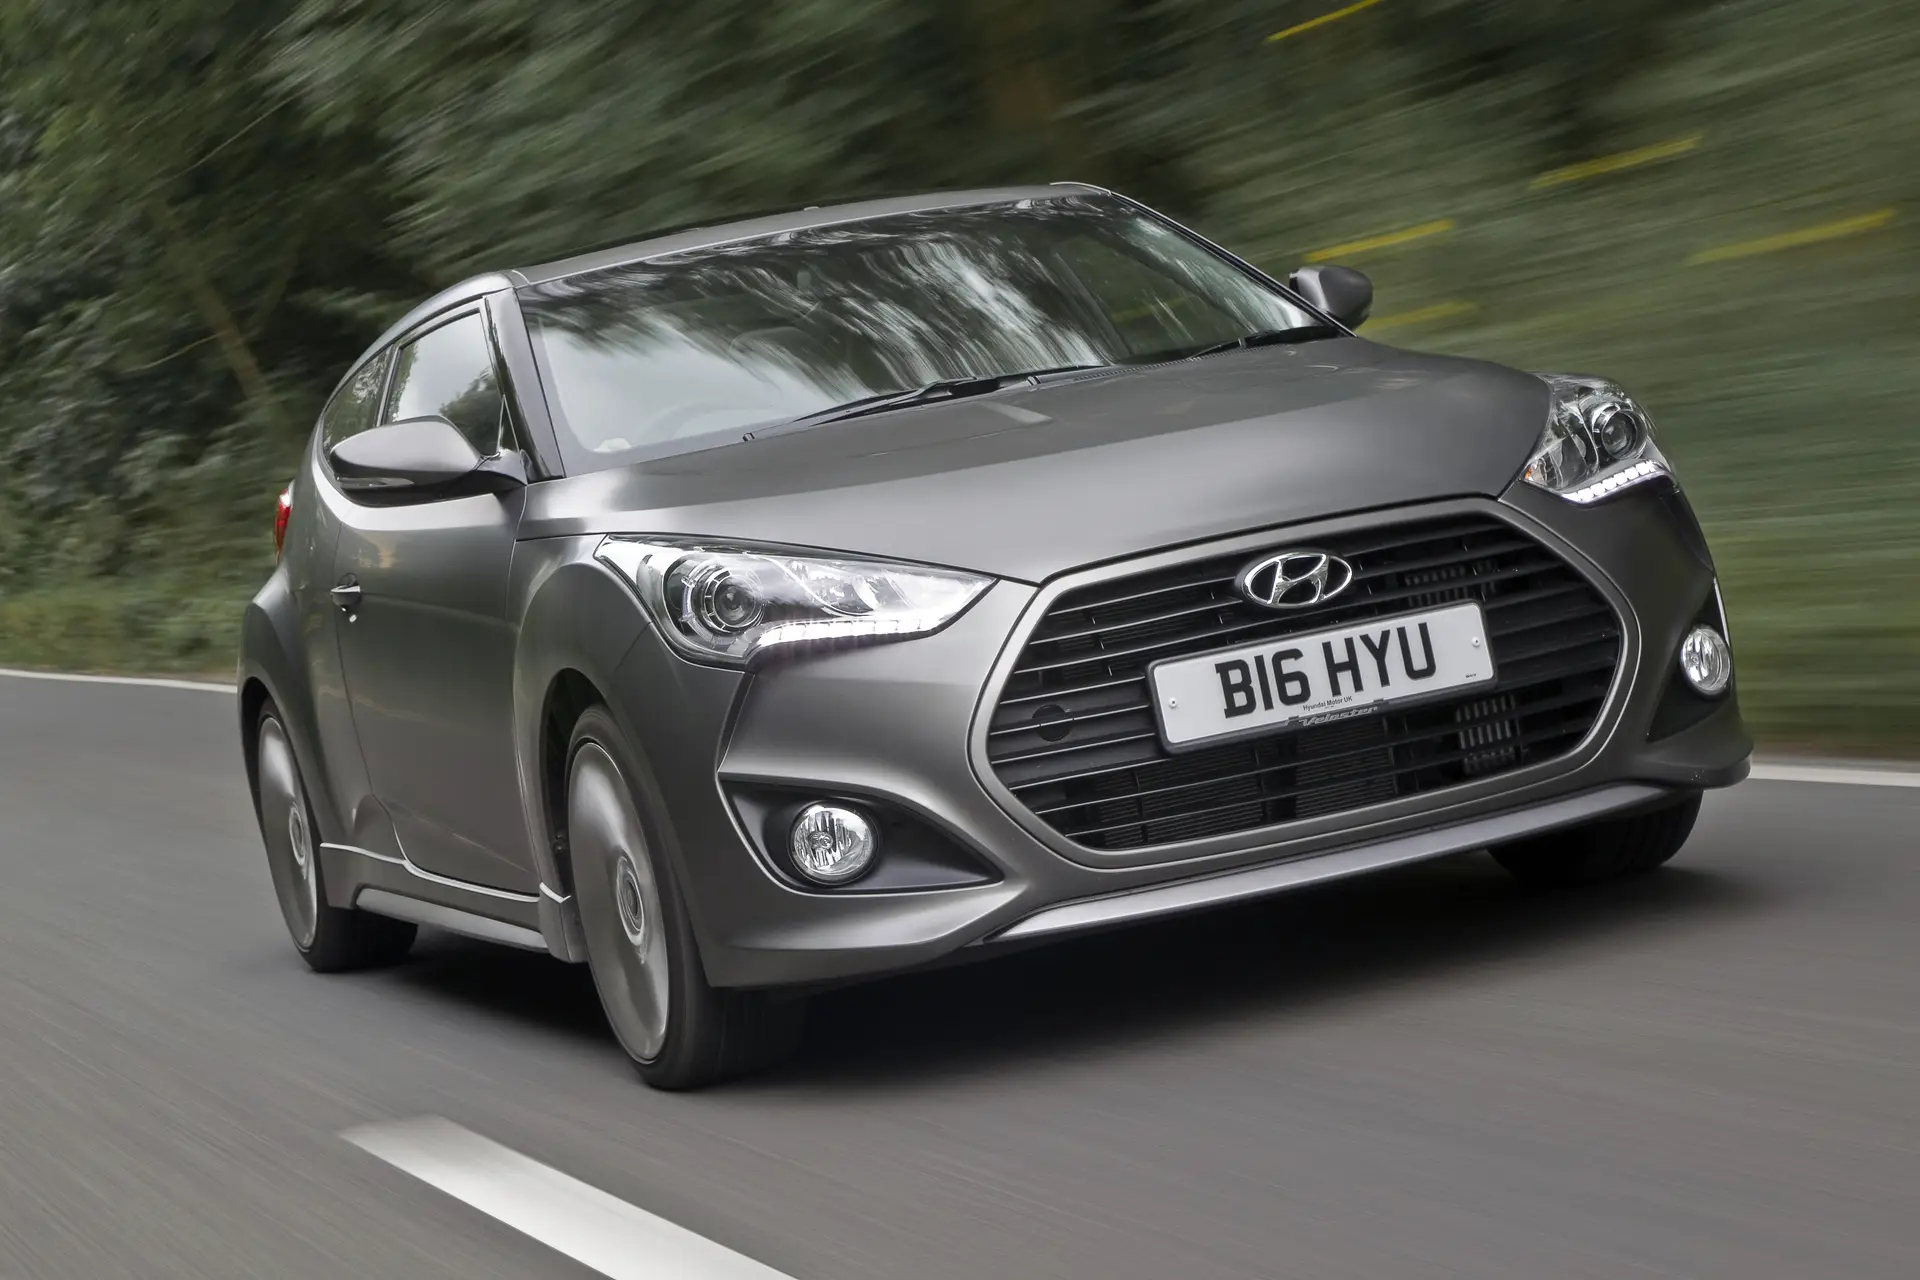 Hyundai Veloster (2013-2015) Review: exterior front three quarter photo of the Hyundai Veloster on the road